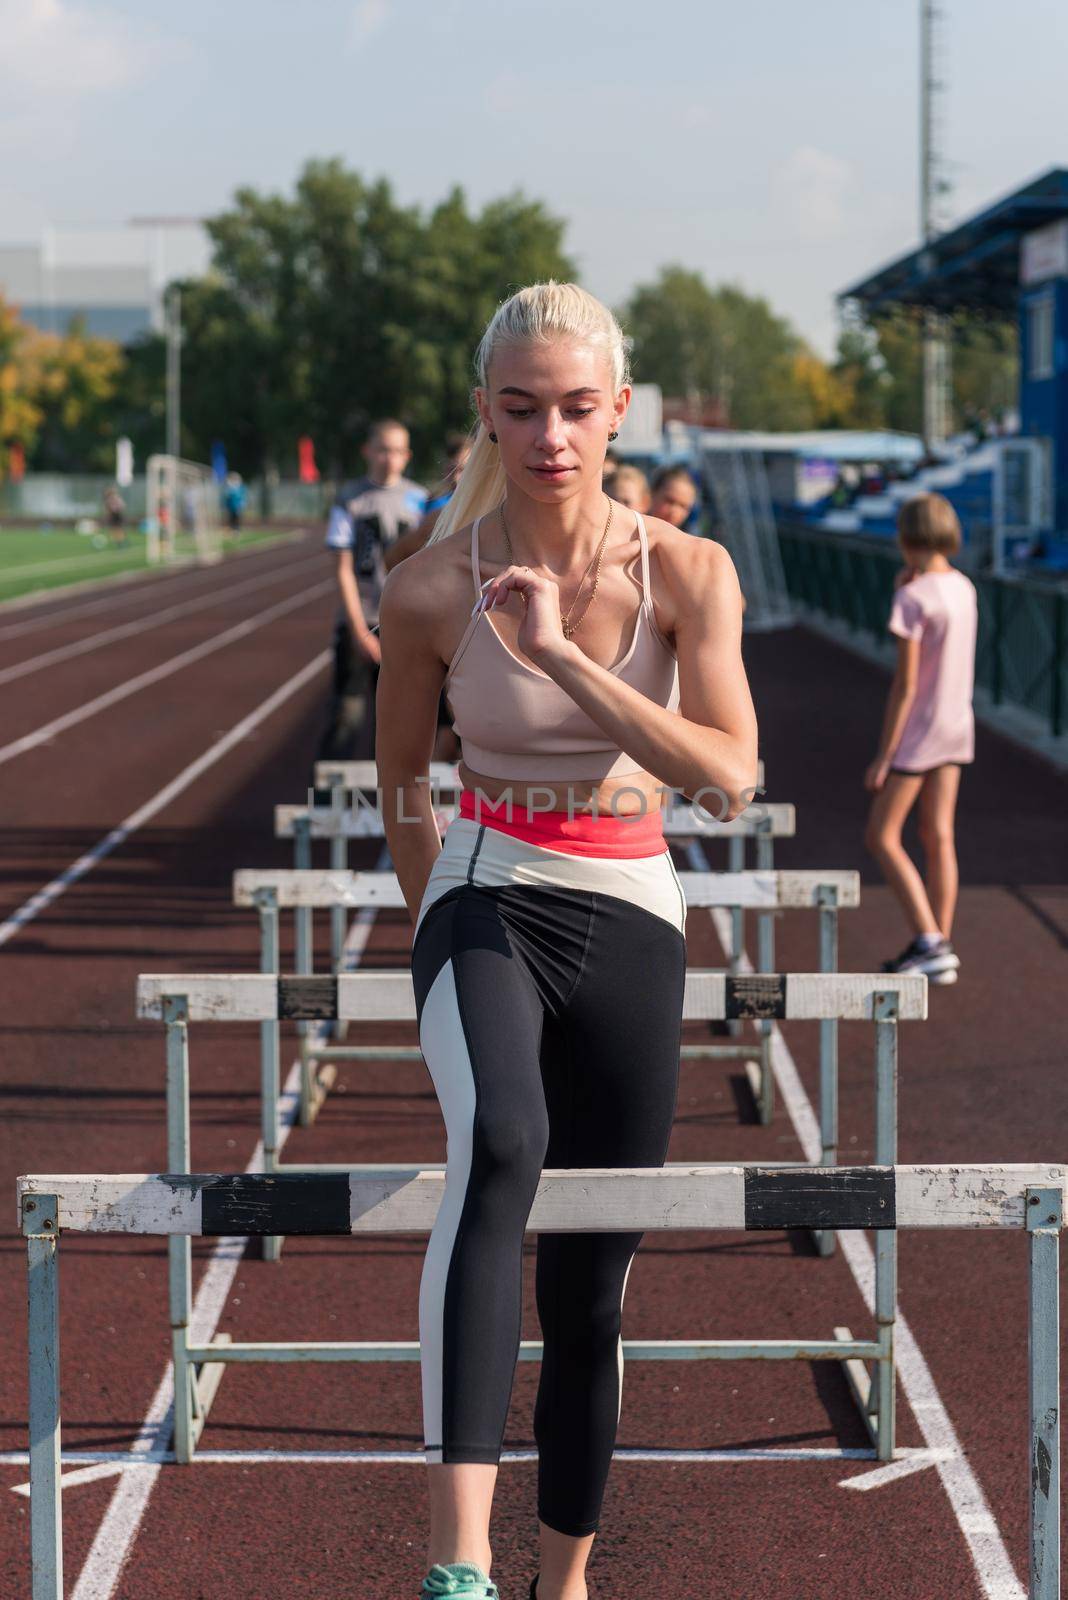 Young woman athlete runnner is exercising hurdles at the stadium outdoors